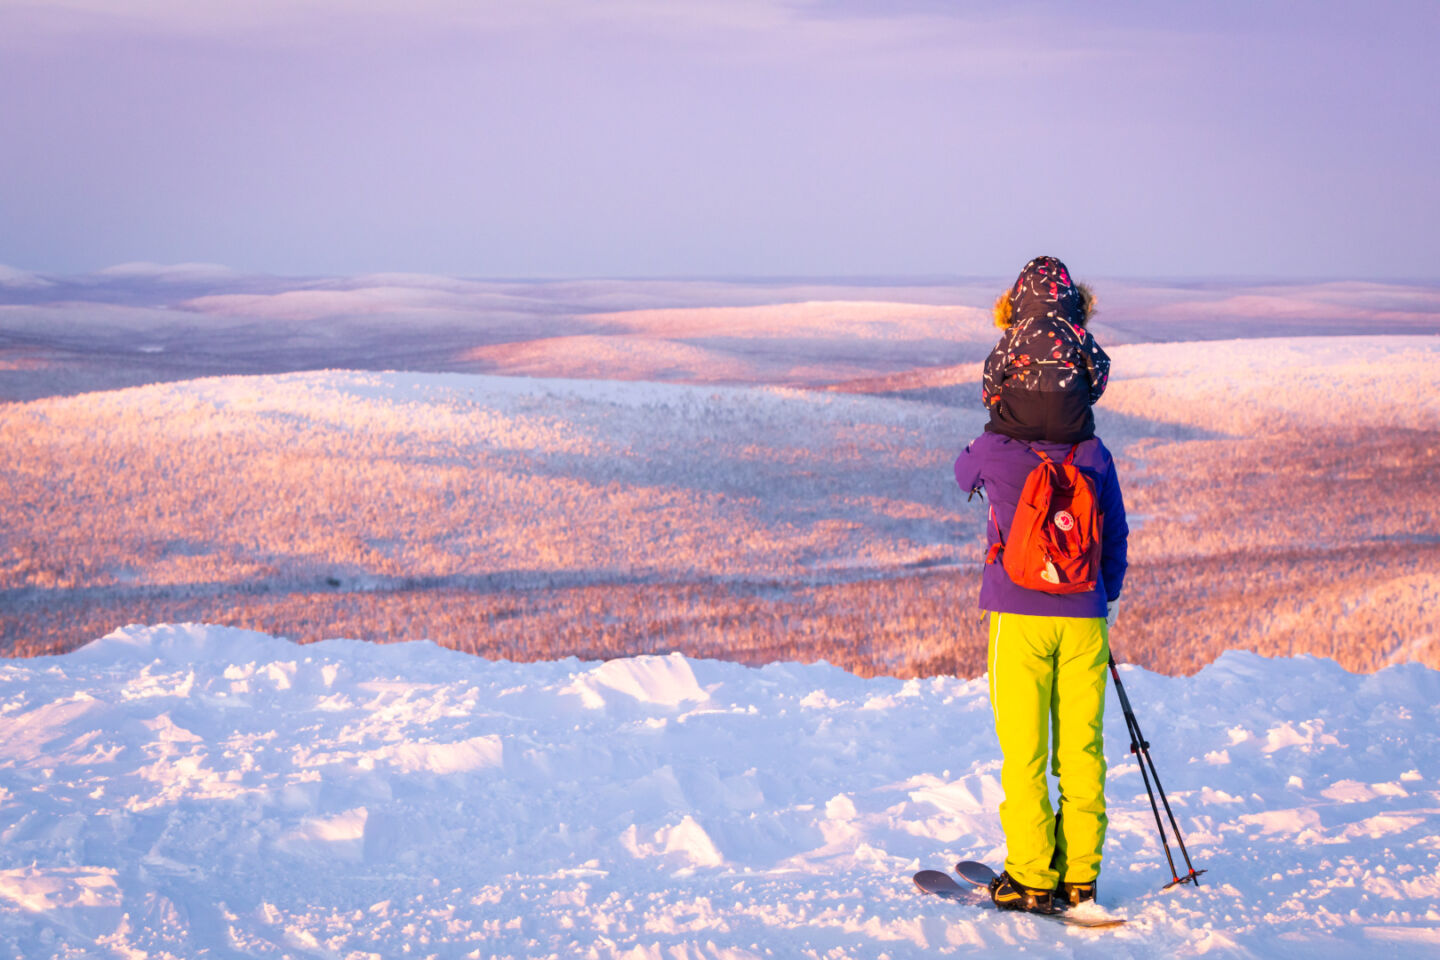 You can't be afraid of distance when finding a job in Lapland